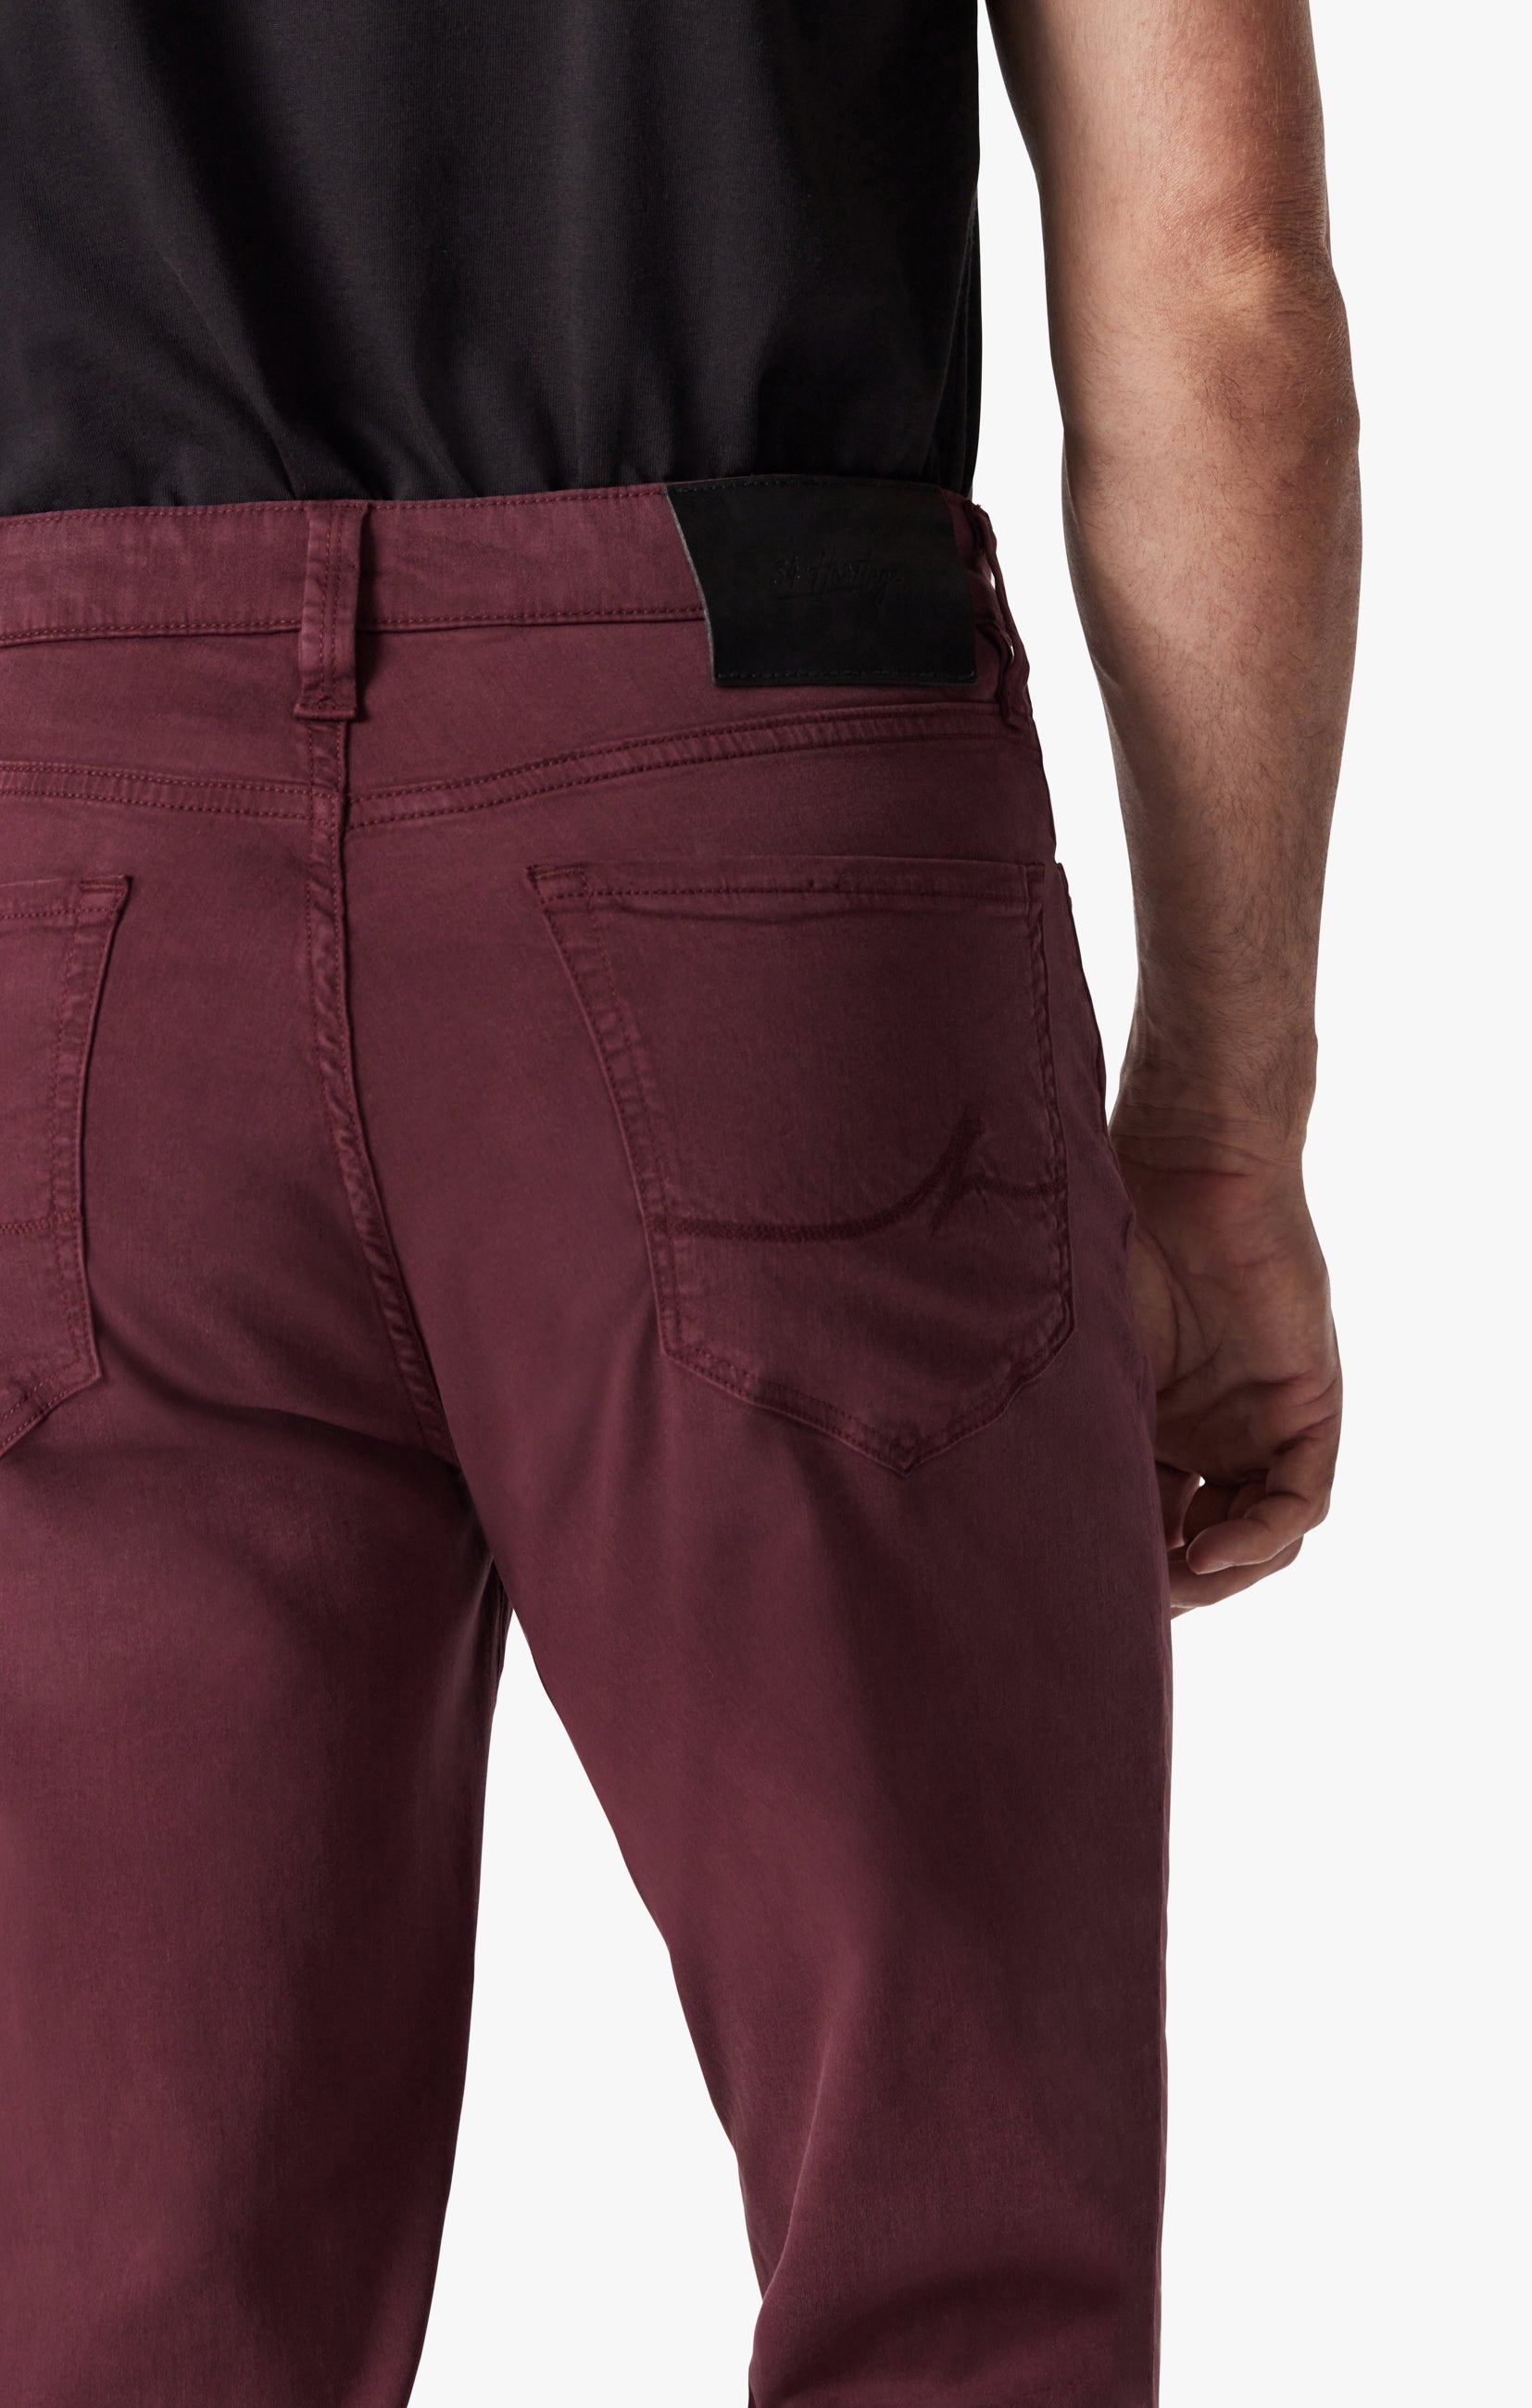 Charisma Relaxed Straight Leg Pants In Tawny Port Twill Image 7